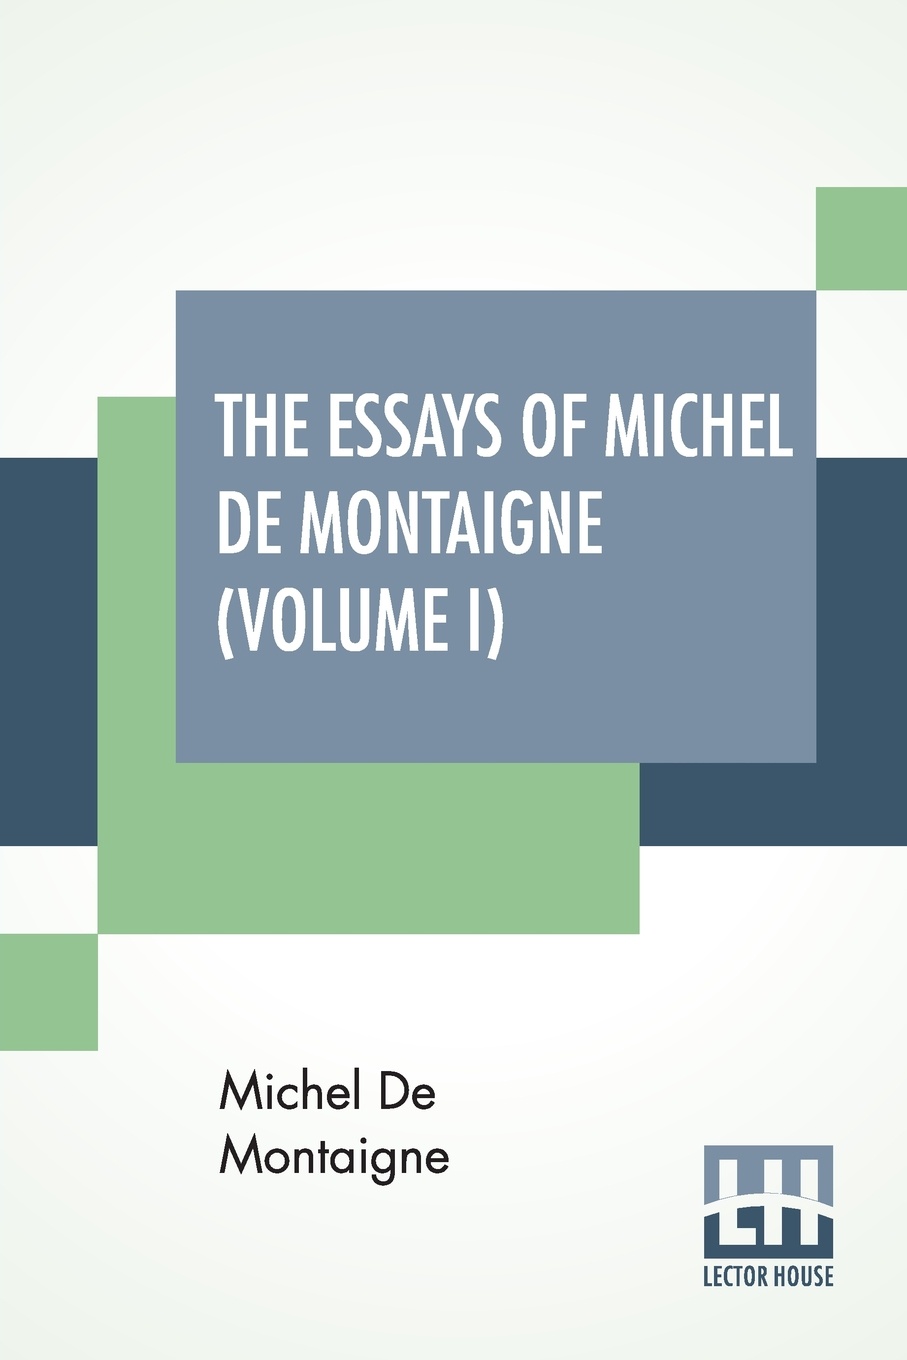 The Essays Of Michel De Montaigne (Volume I). Translated By Charles Cotton. Edited By William Carew Hazlitt.